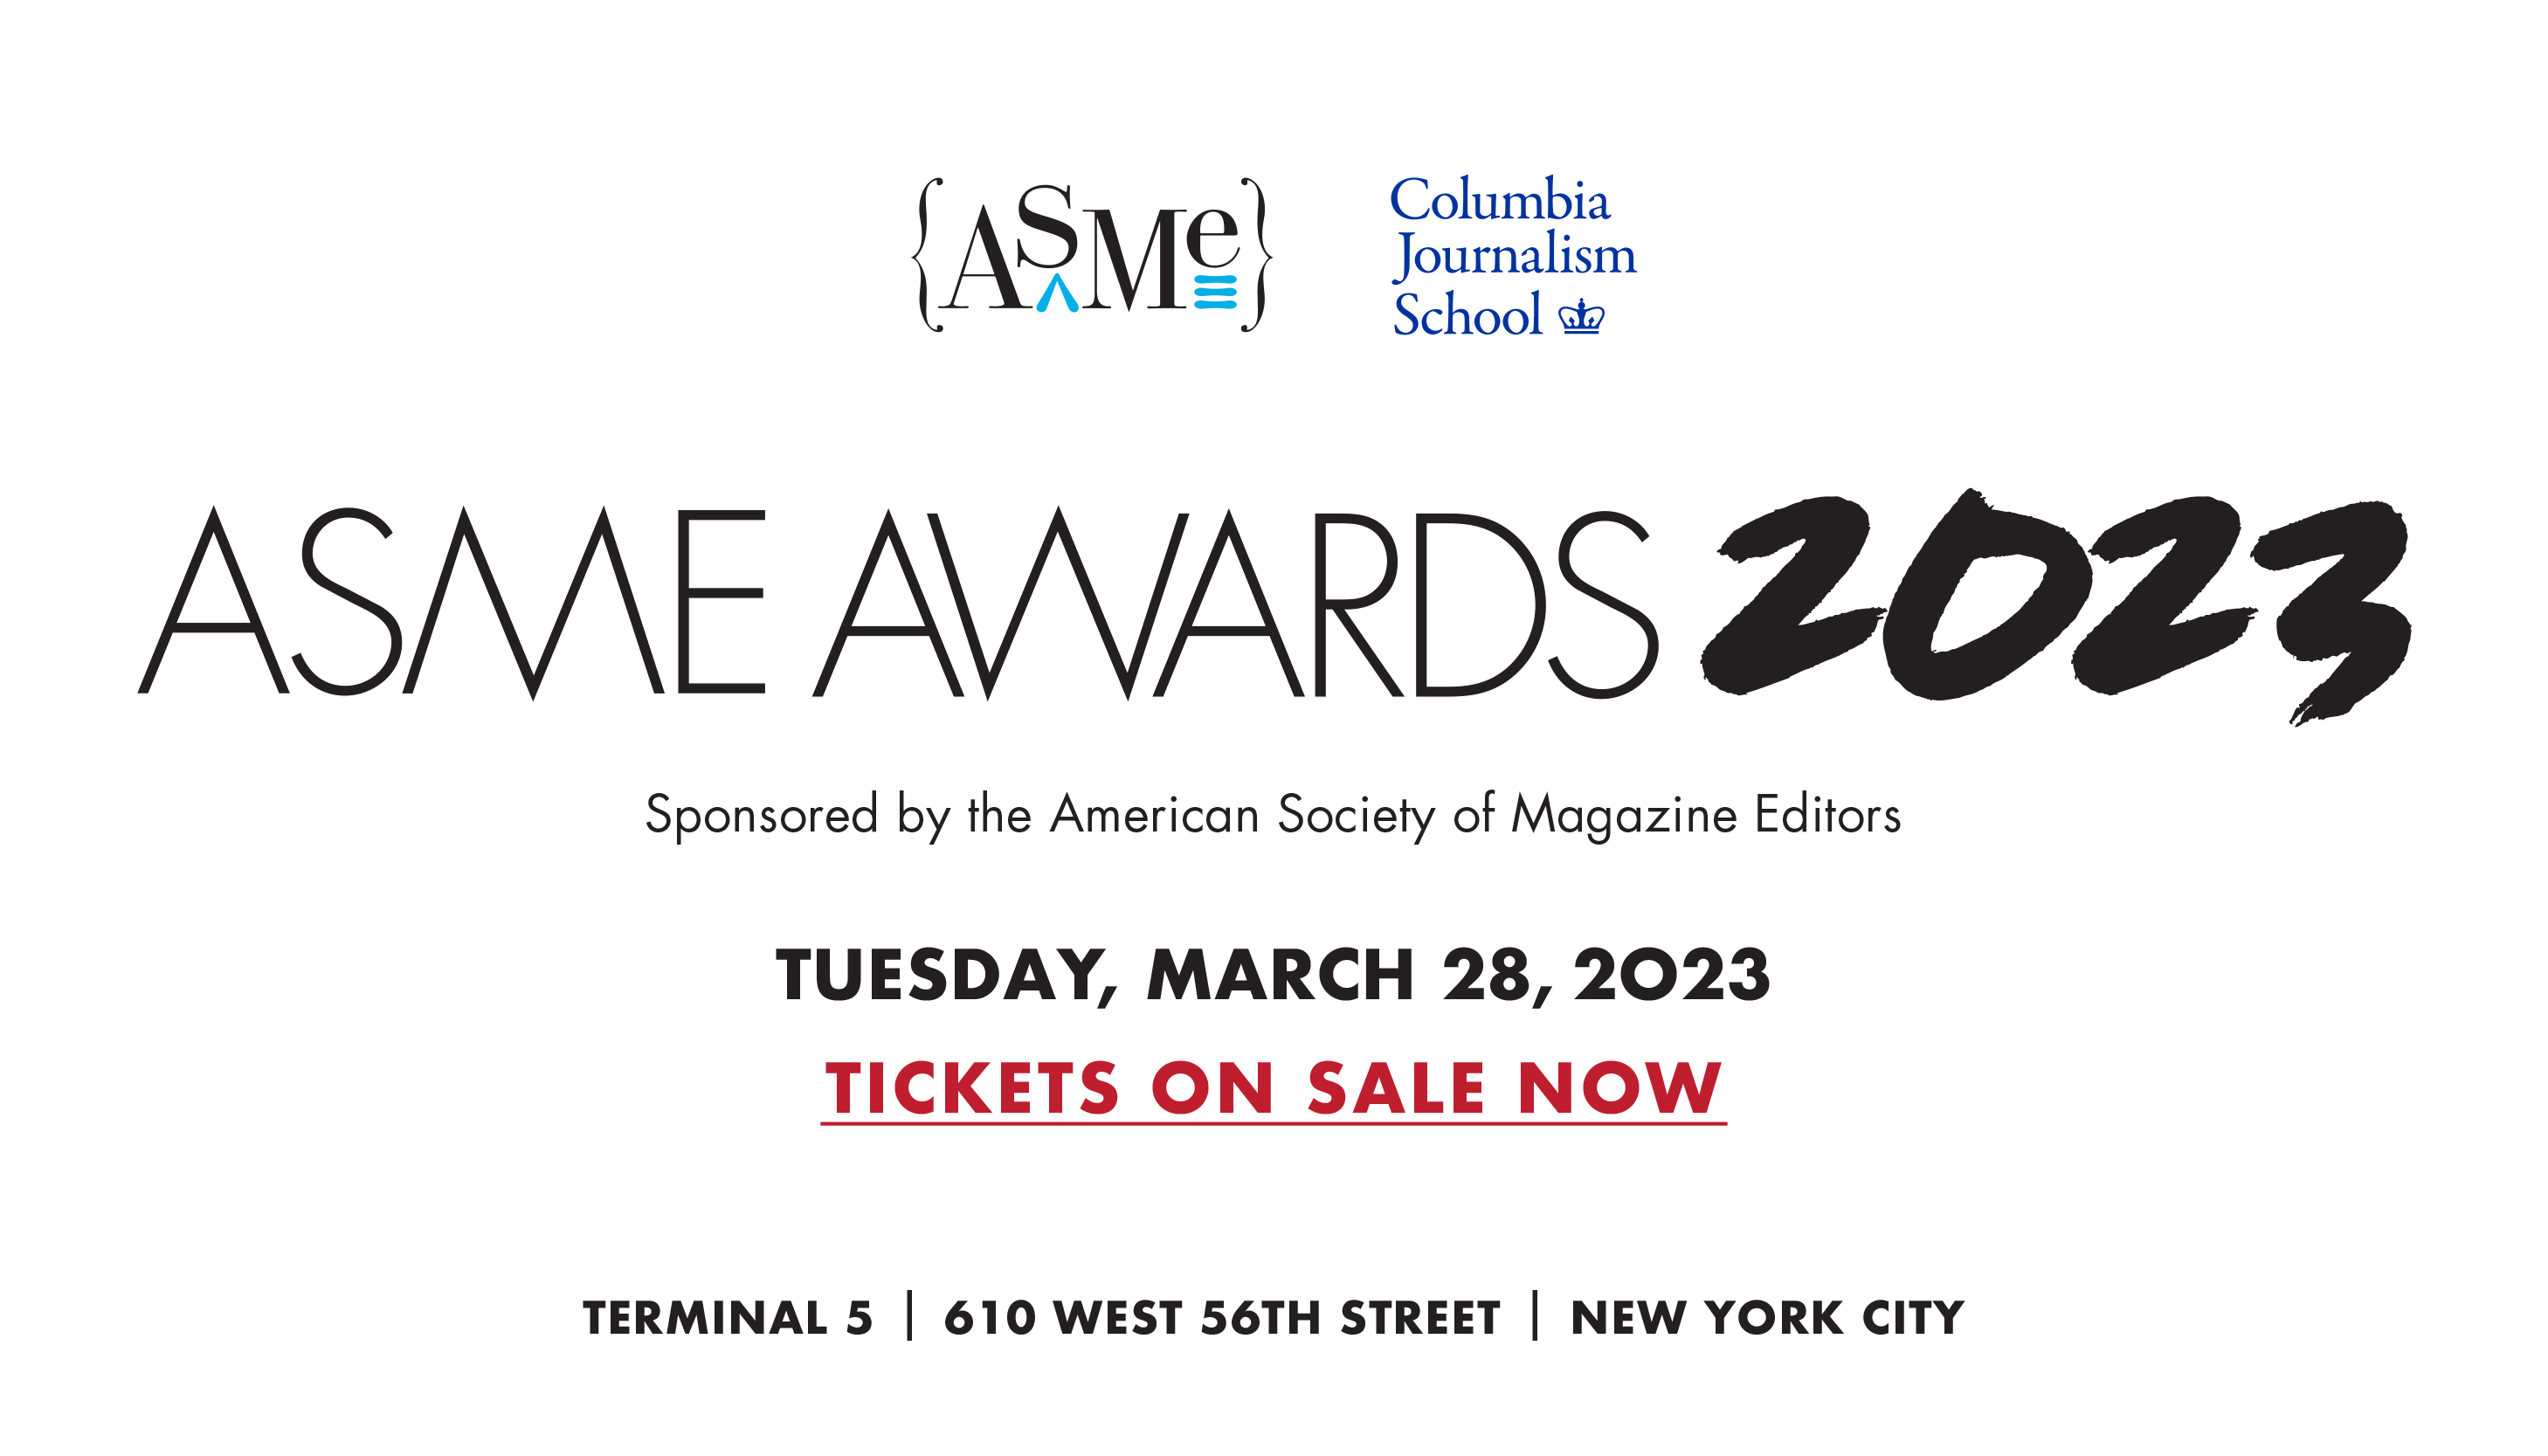 ASME Awards 2023 - March 28, 2023 - Tickets on Sale Now